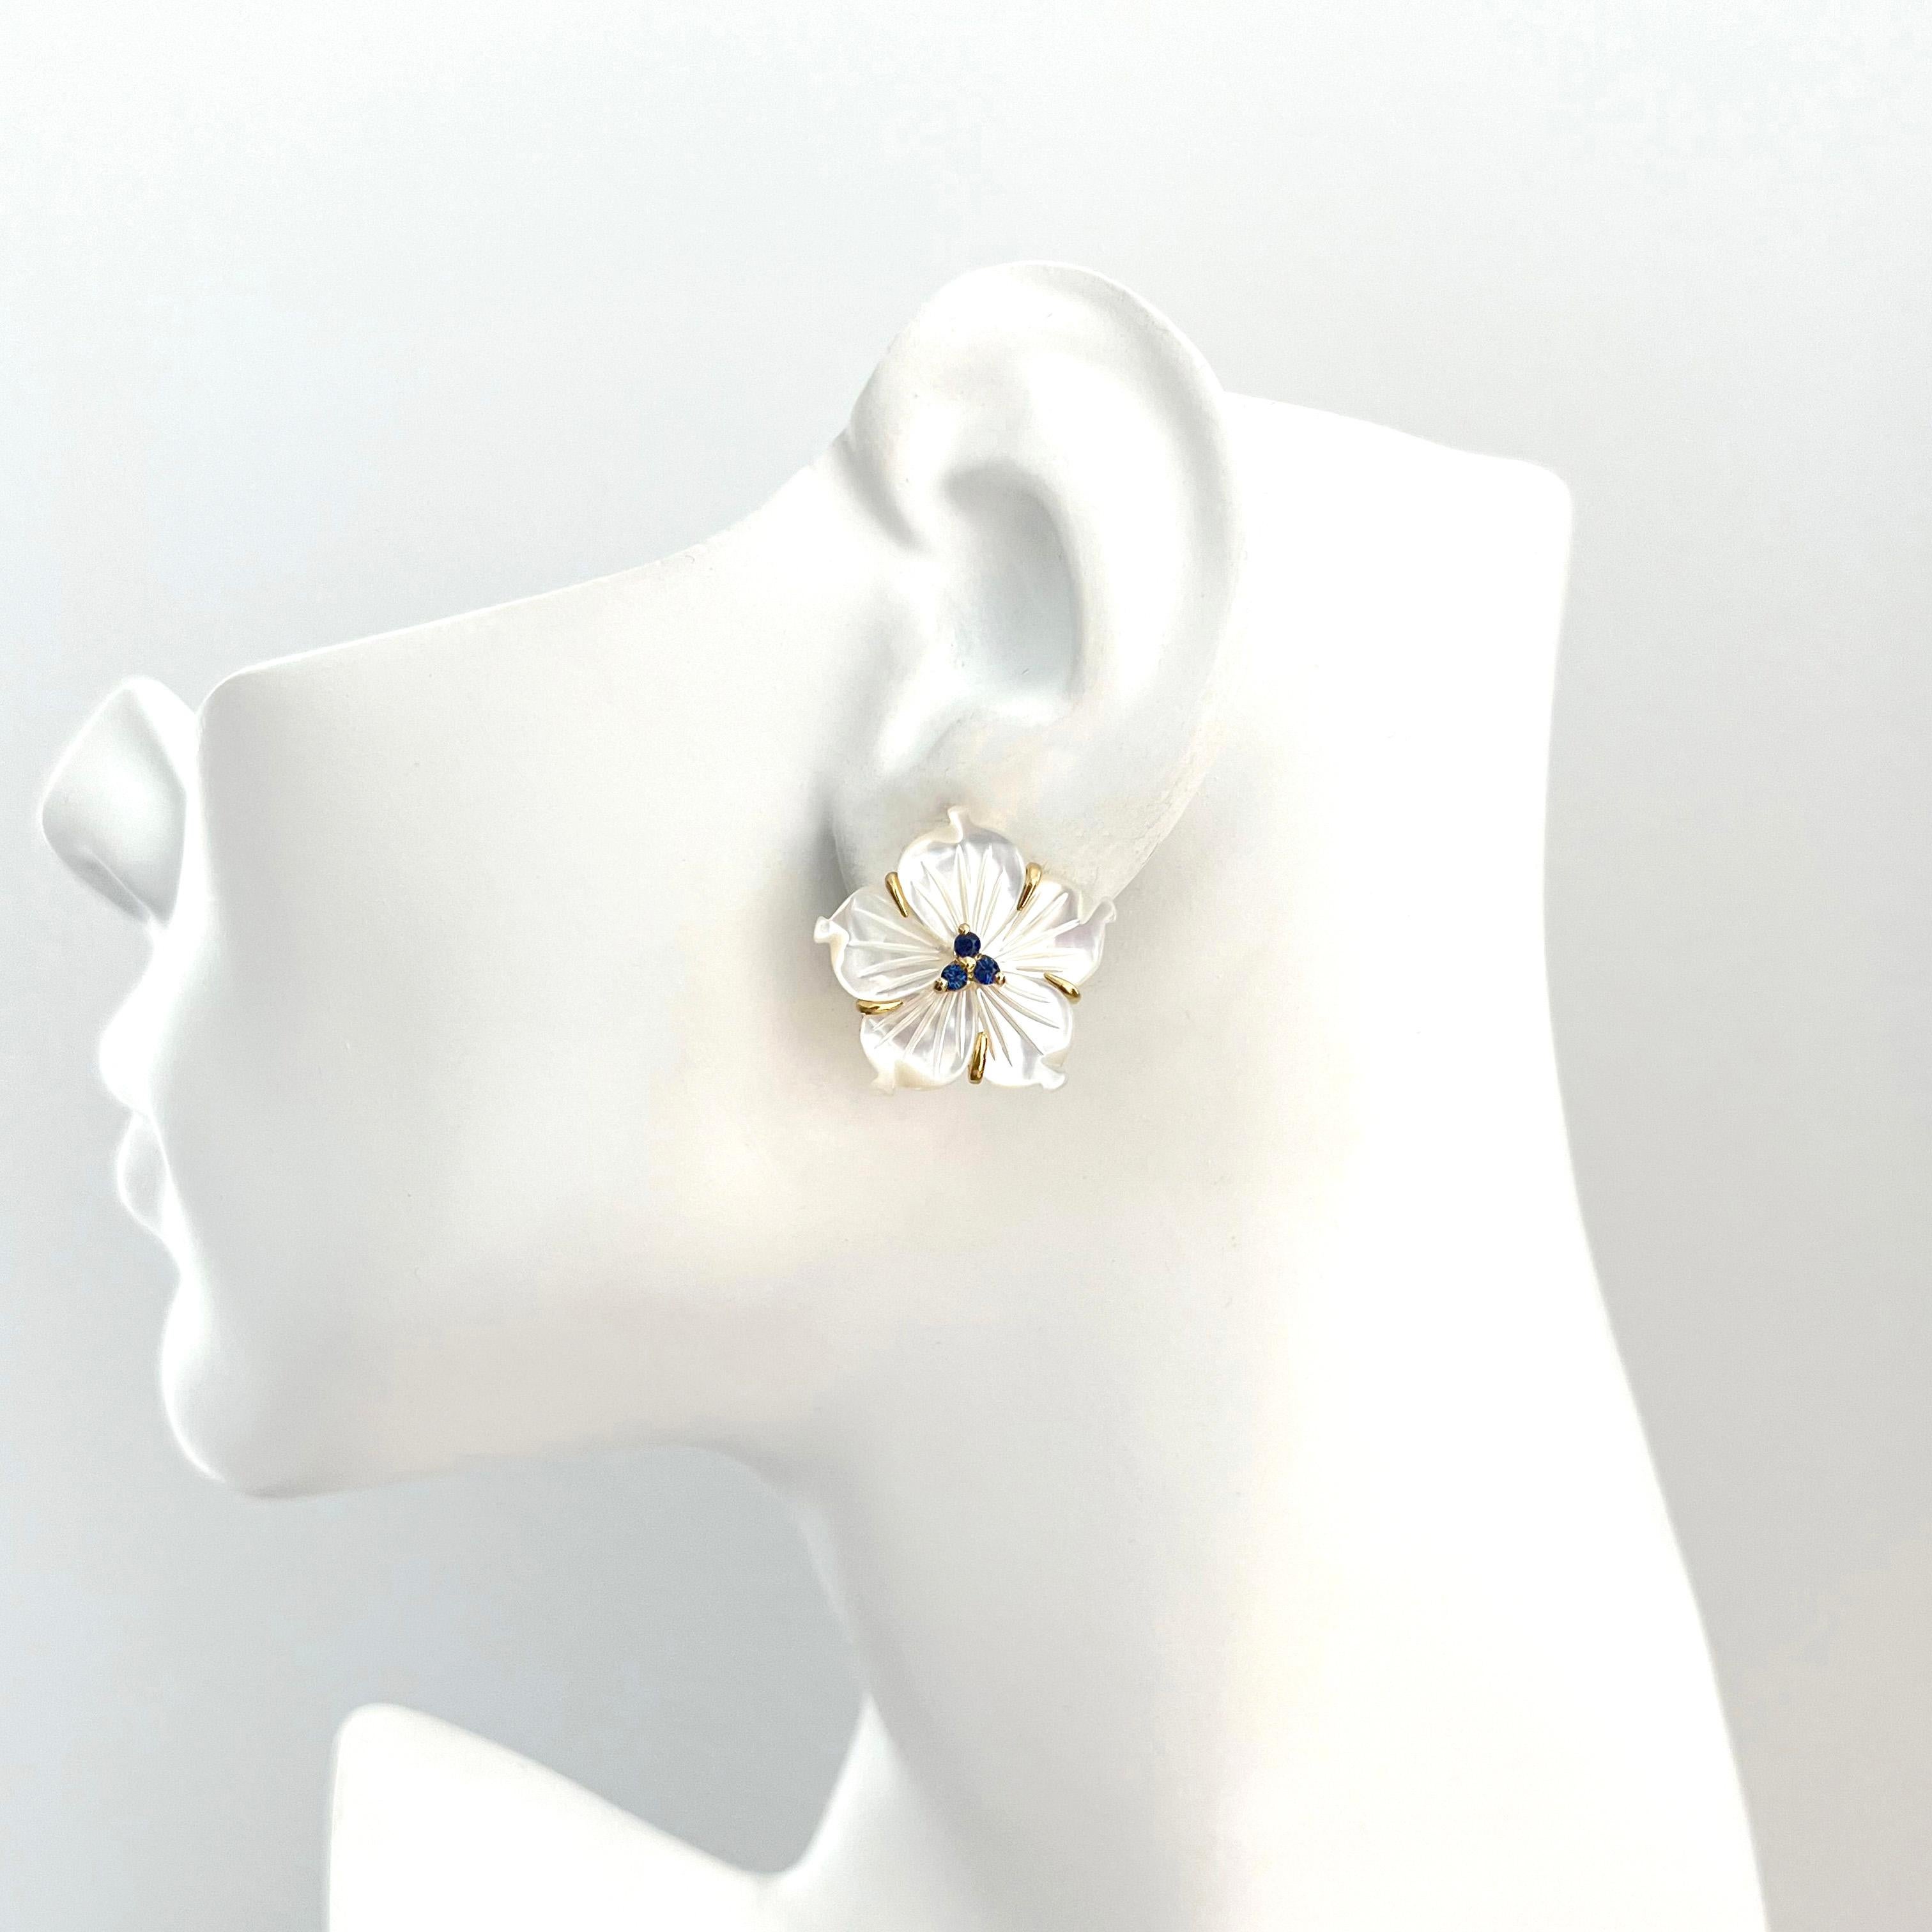 23mm Carved Mother of Pearl Flower with Lab Sapphire Center Earrings For Sale 2